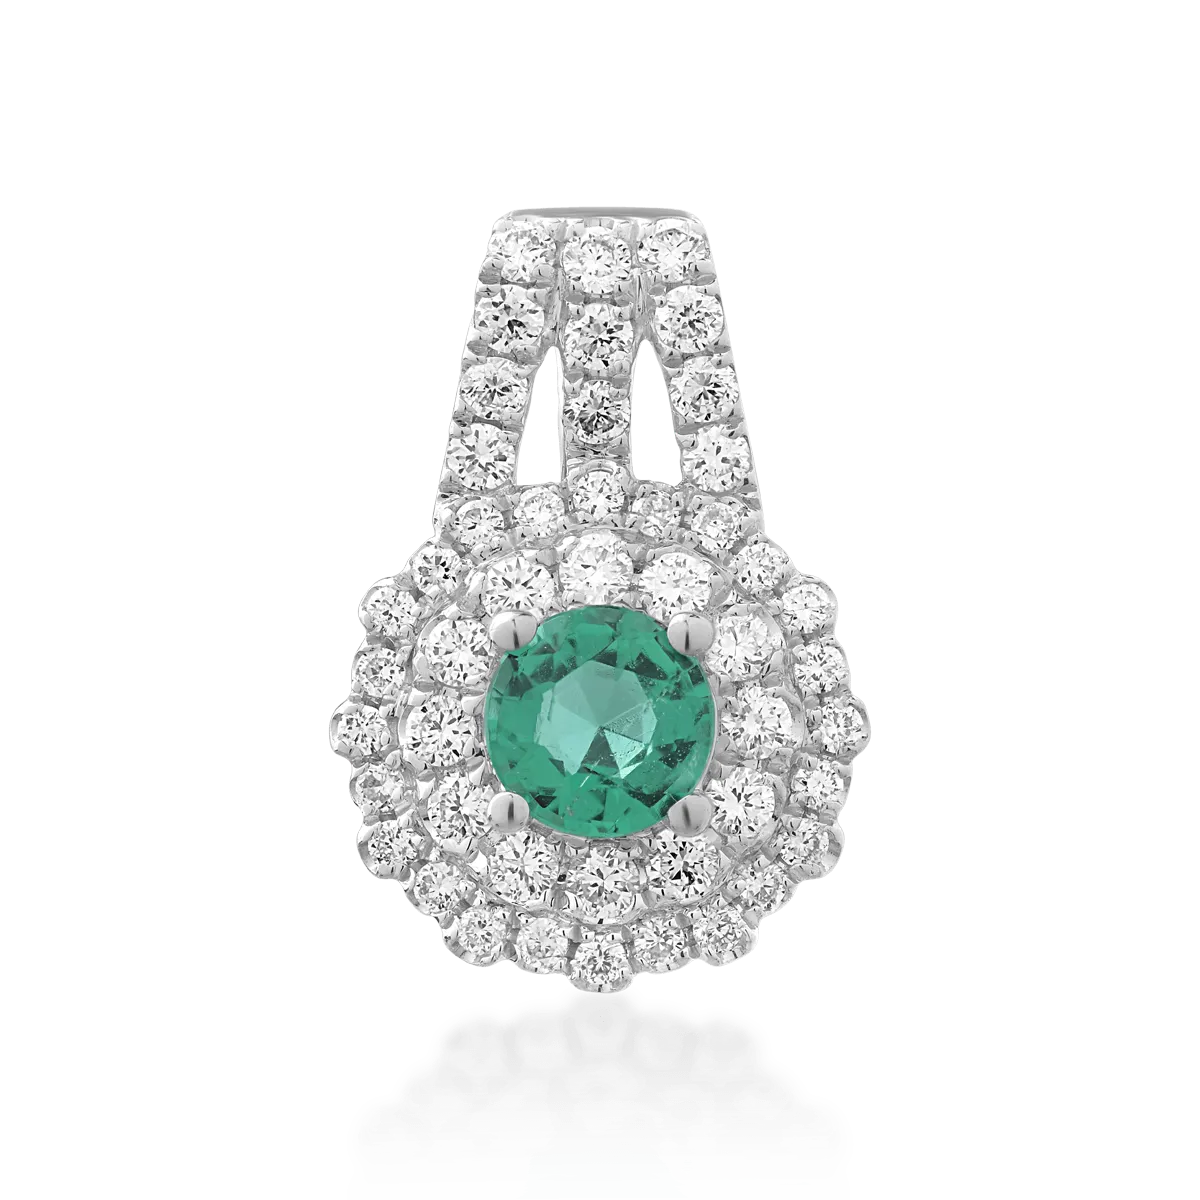 18K white gold pendant with emerald of 0.24ct and diamonds of 0.24ct